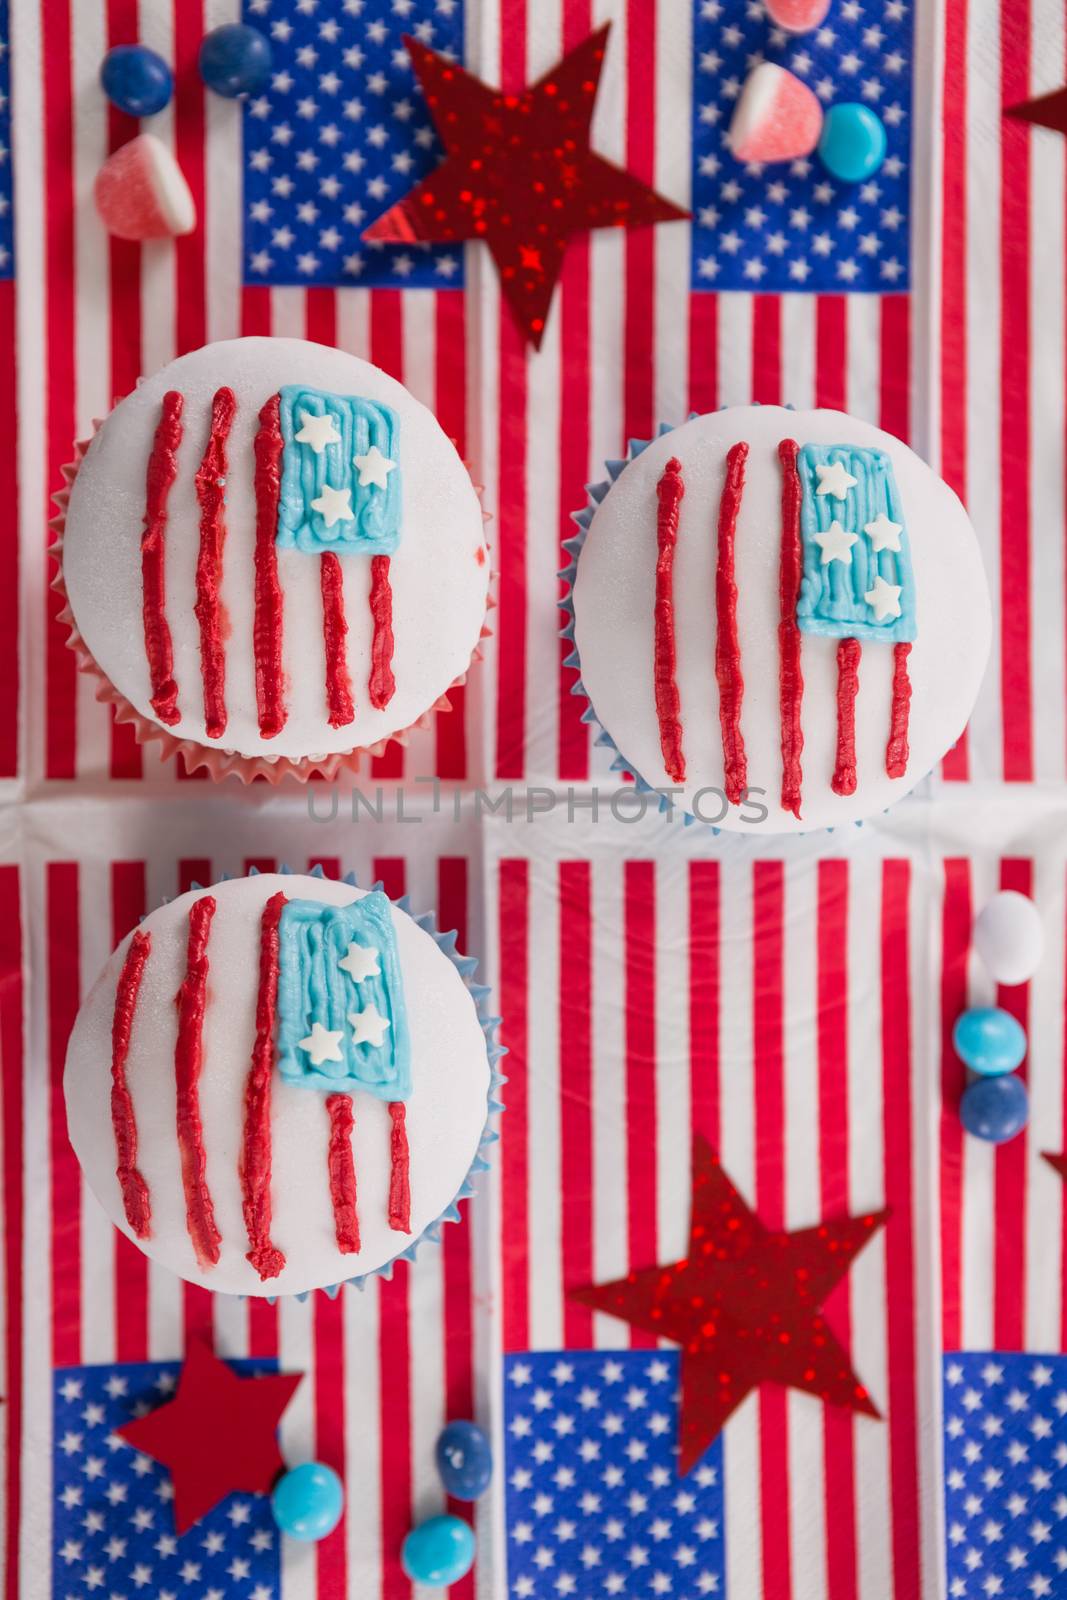 Close-up of decorated cupcakes with 4th july theme